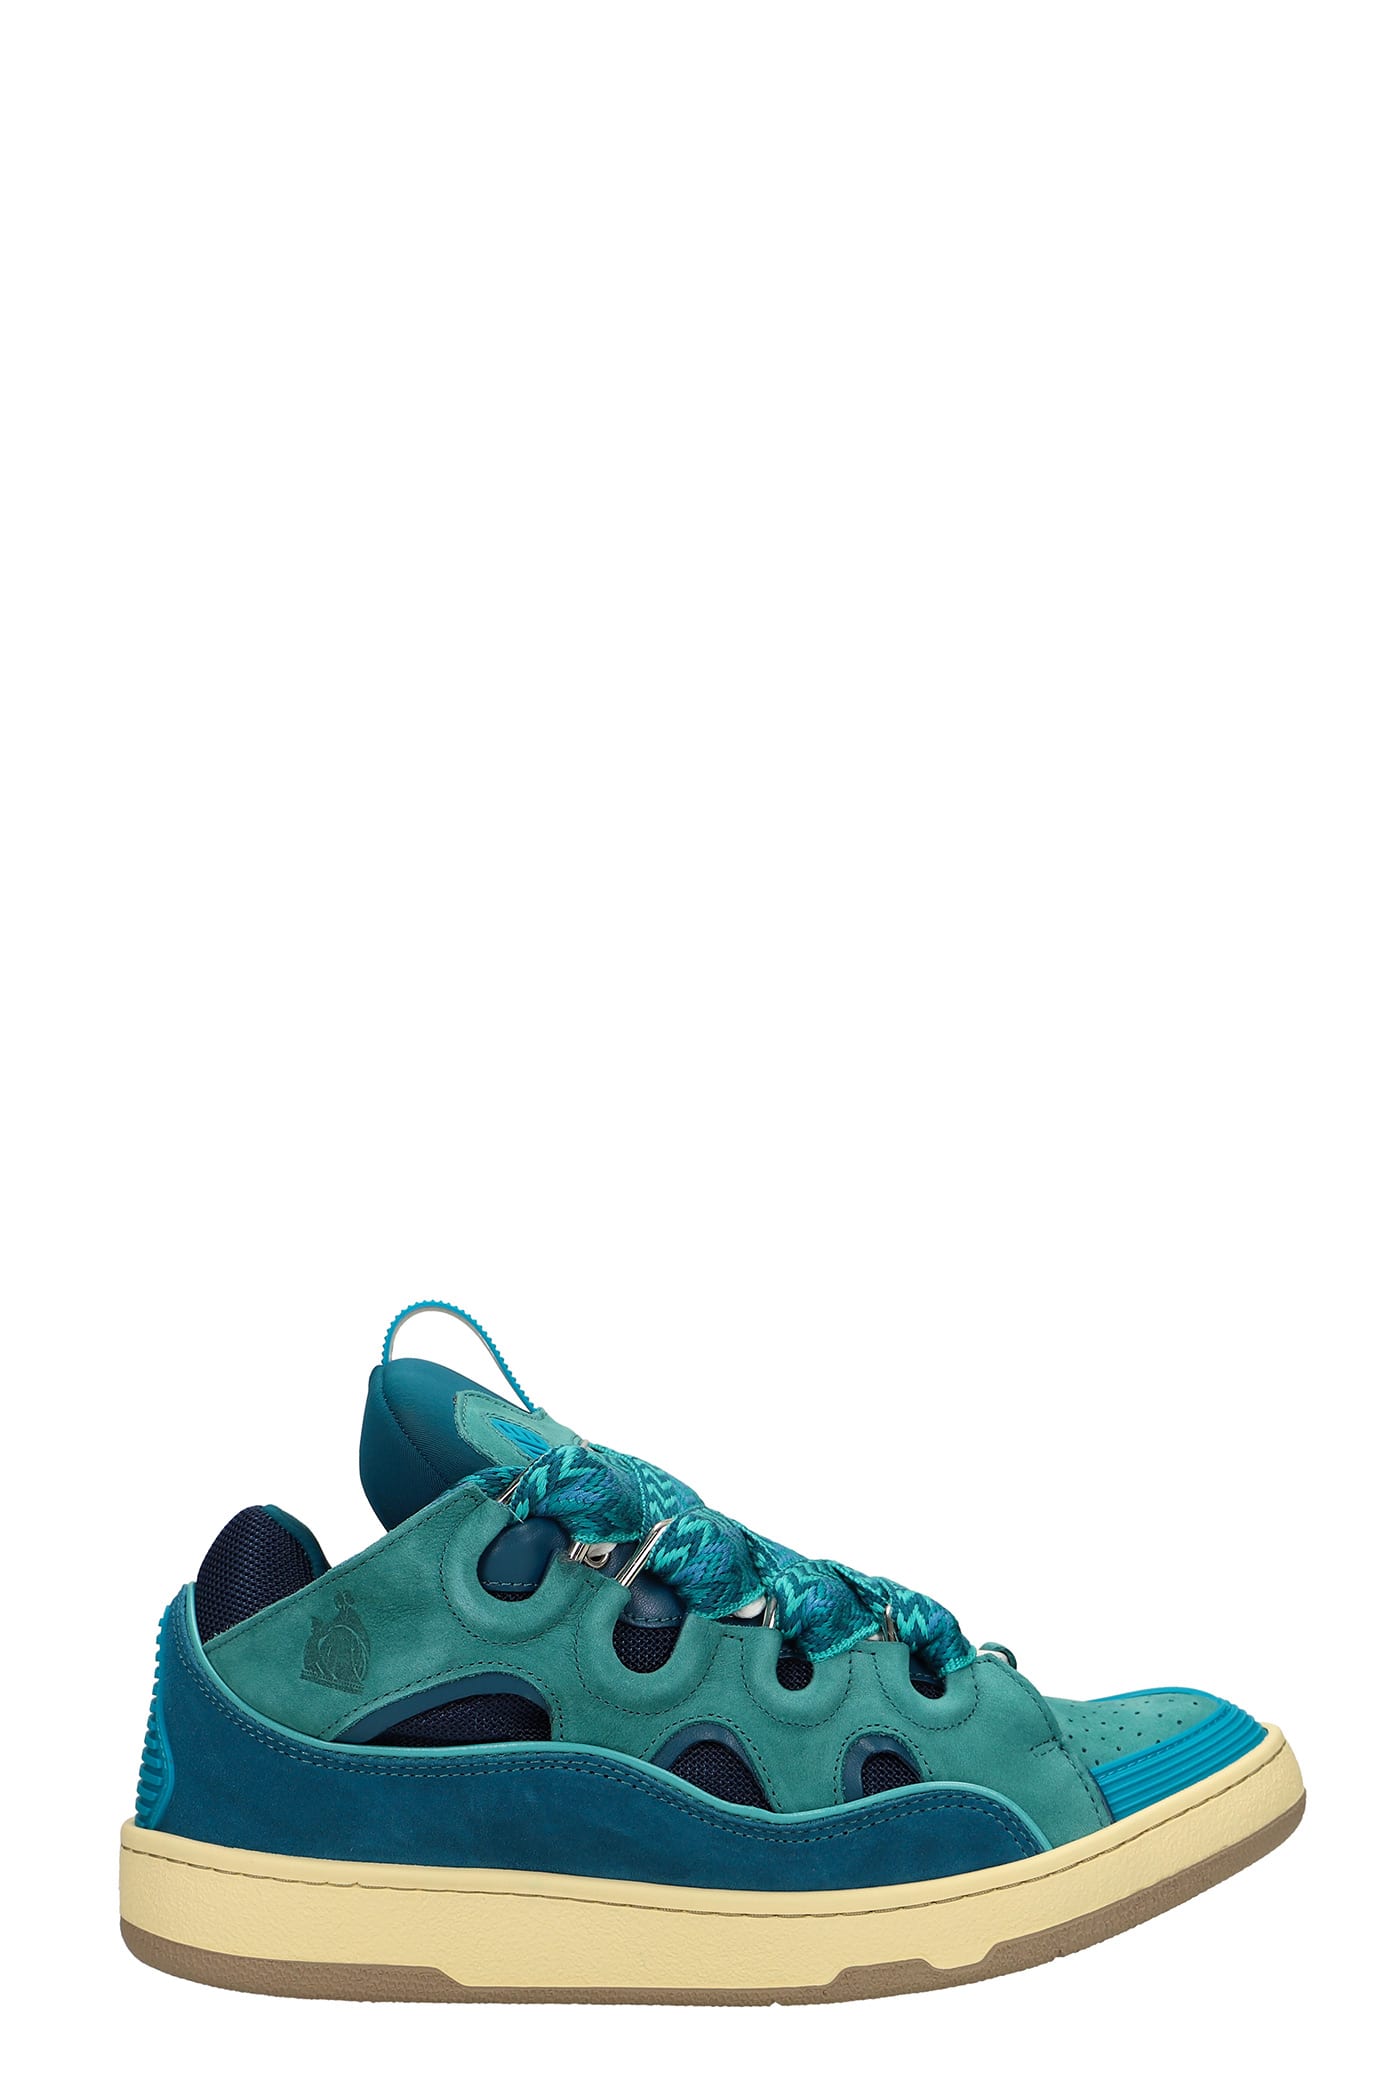 LANVIN CURB SNEAKERS IN CYAN SUEDE AND LEATHER